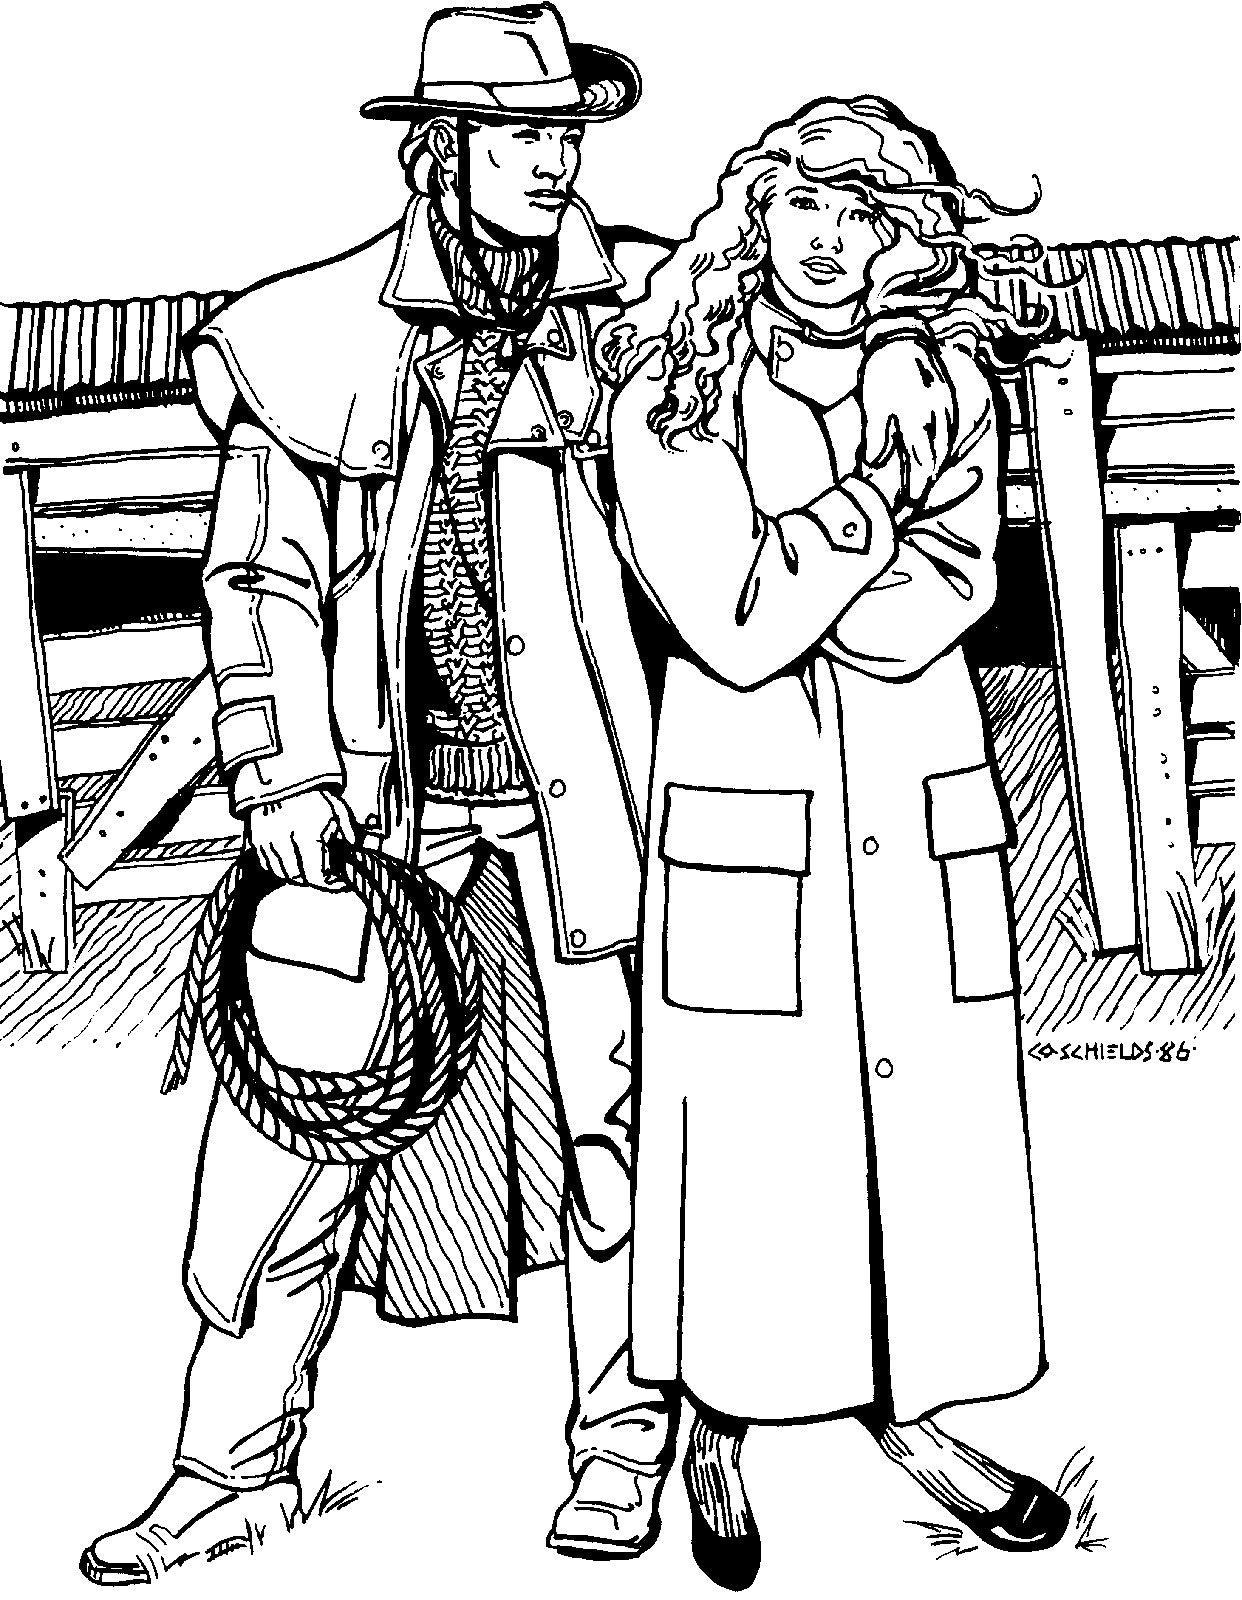 Pen and ink illustration of a man and a woman standing outside on a farm wearing the Drover's coats.  Illustration by Gretchen Schields.